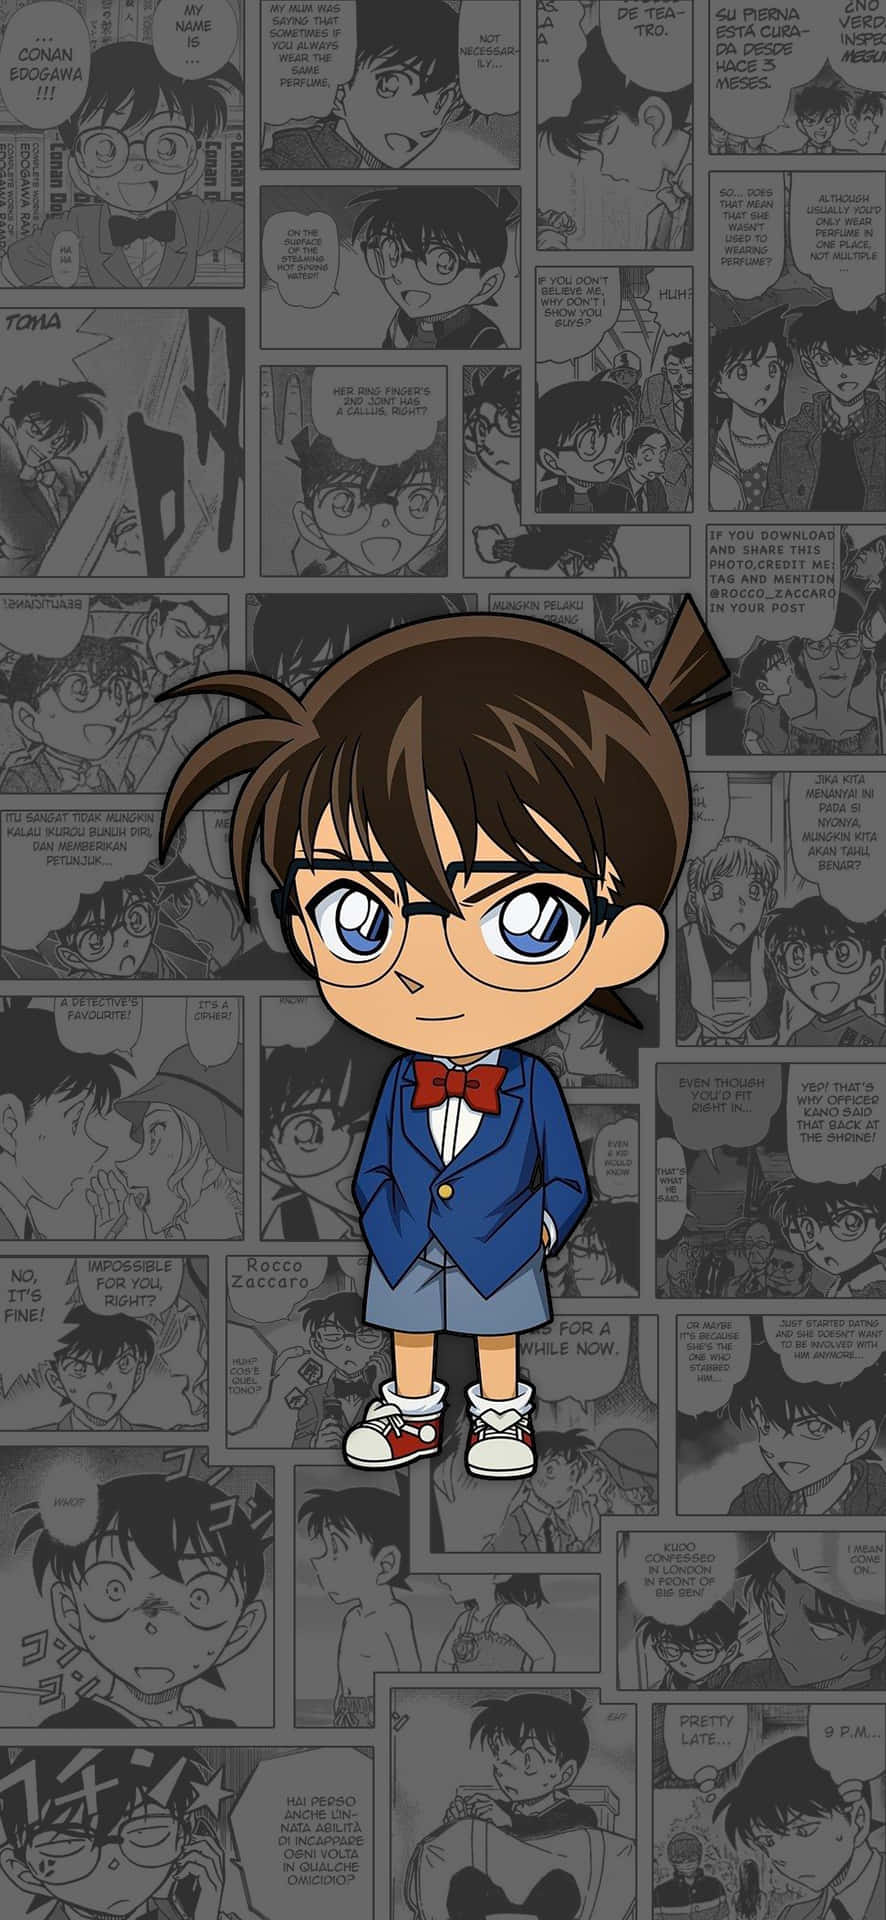 The leading detective of Japan, Detective Conan